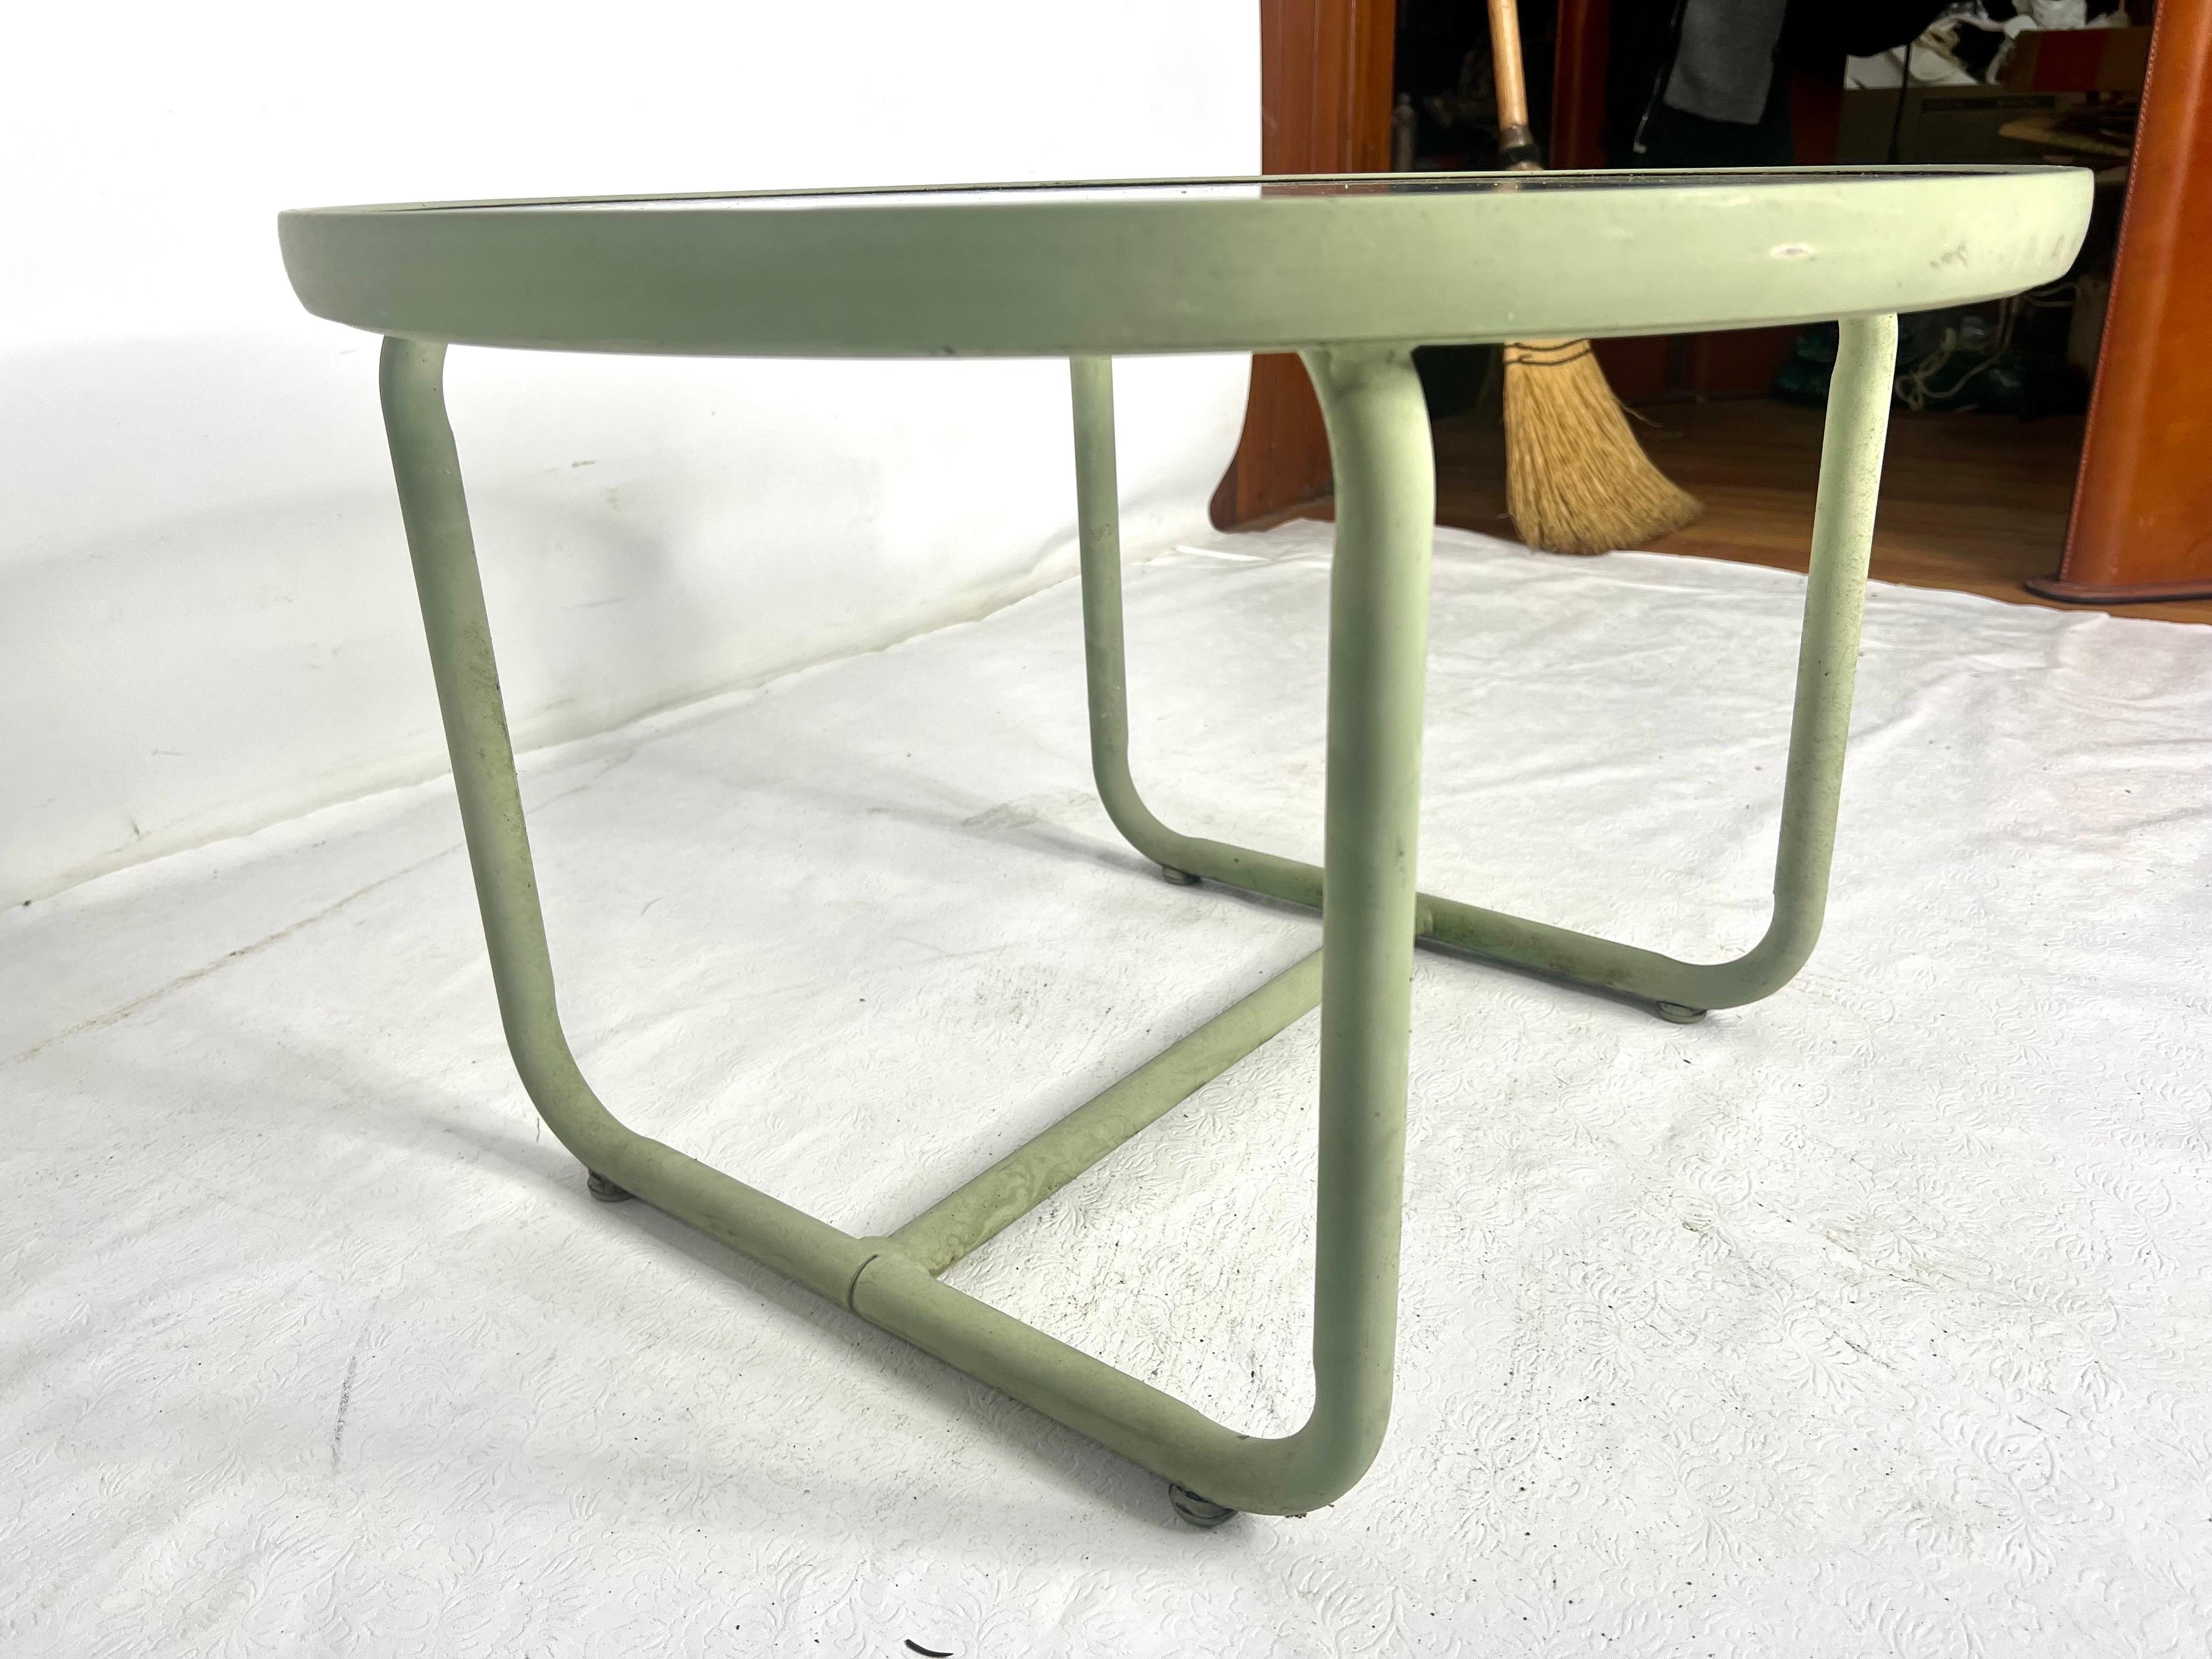 Very nice vintage aluminum and glass side table made by brown Jordan in a pale green. The table does sit lower to the ground.